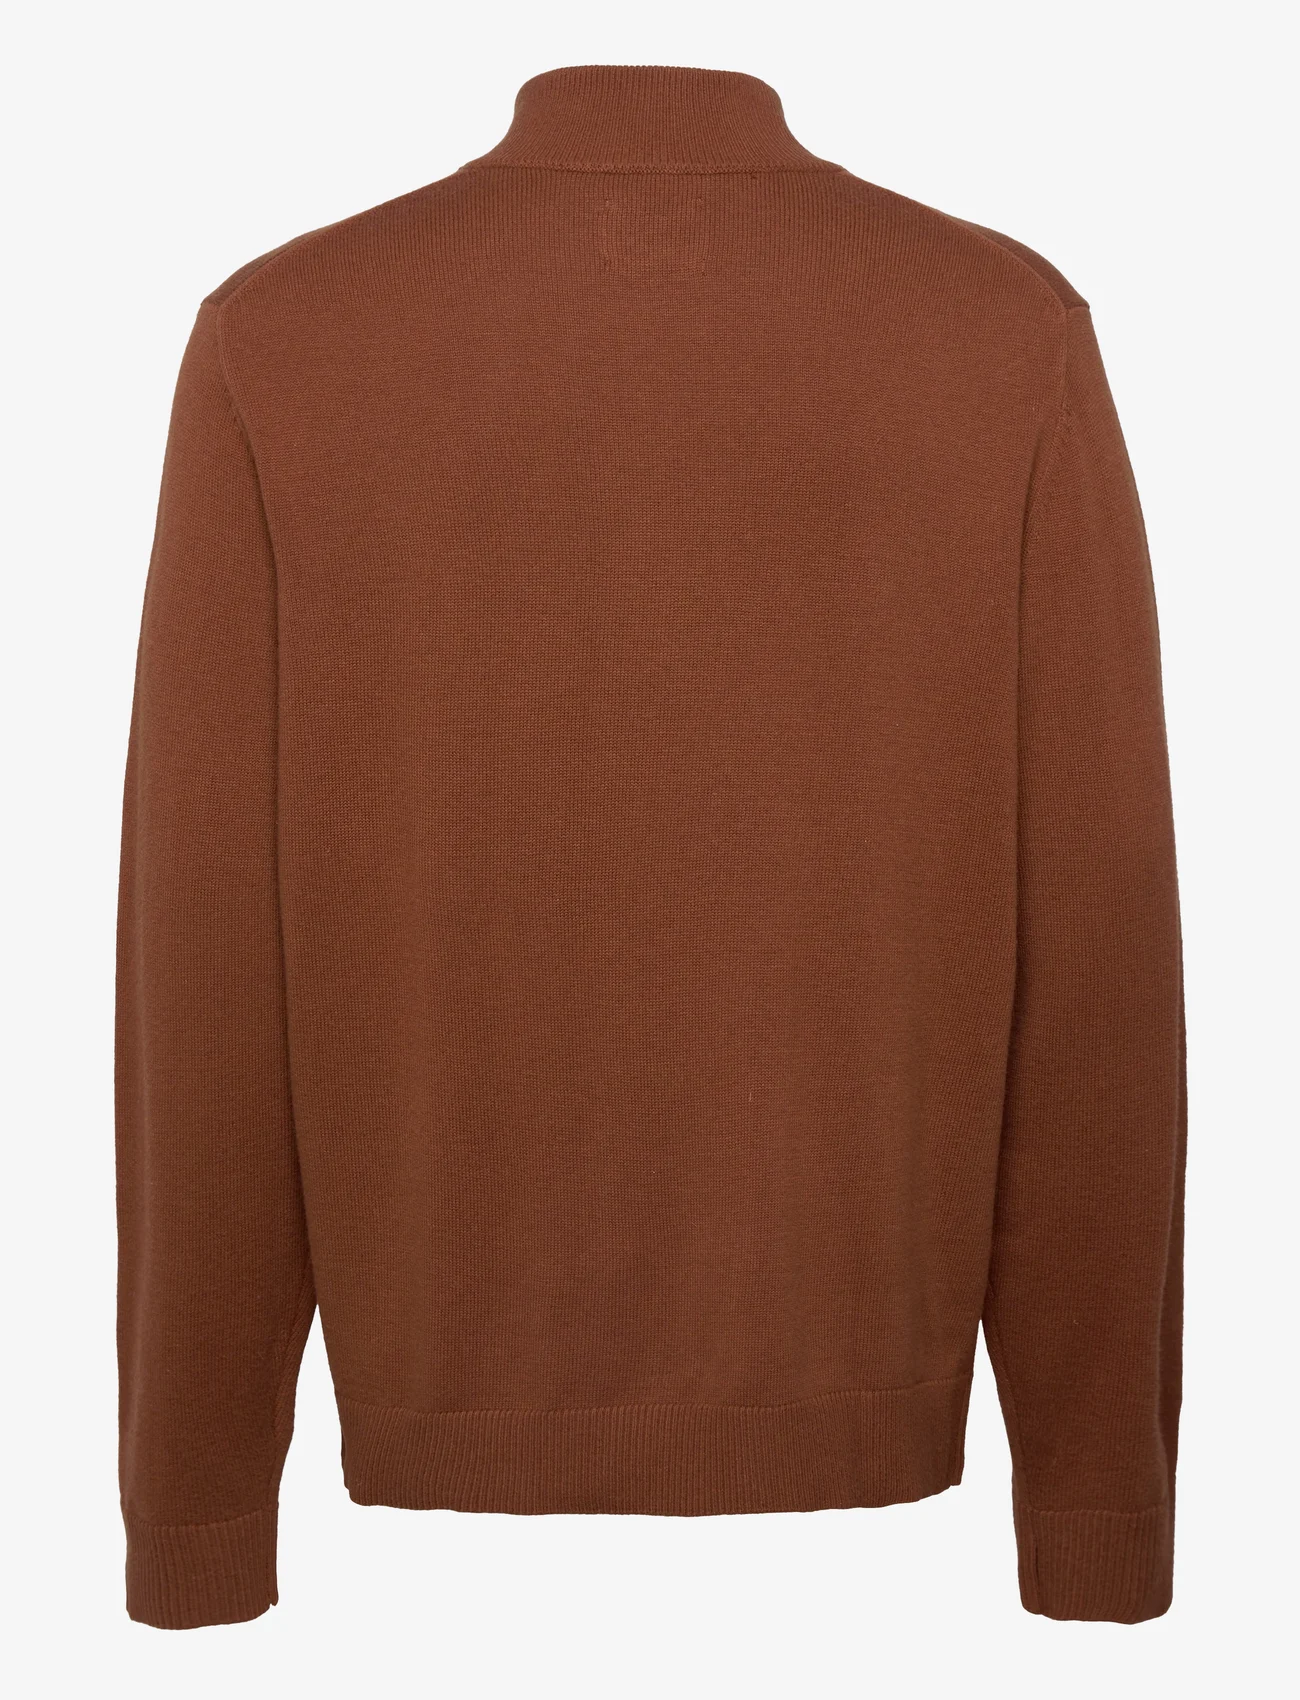 Abercrombie & Fitch - ANF MENS SWEATERS - trøjer - brown - 1